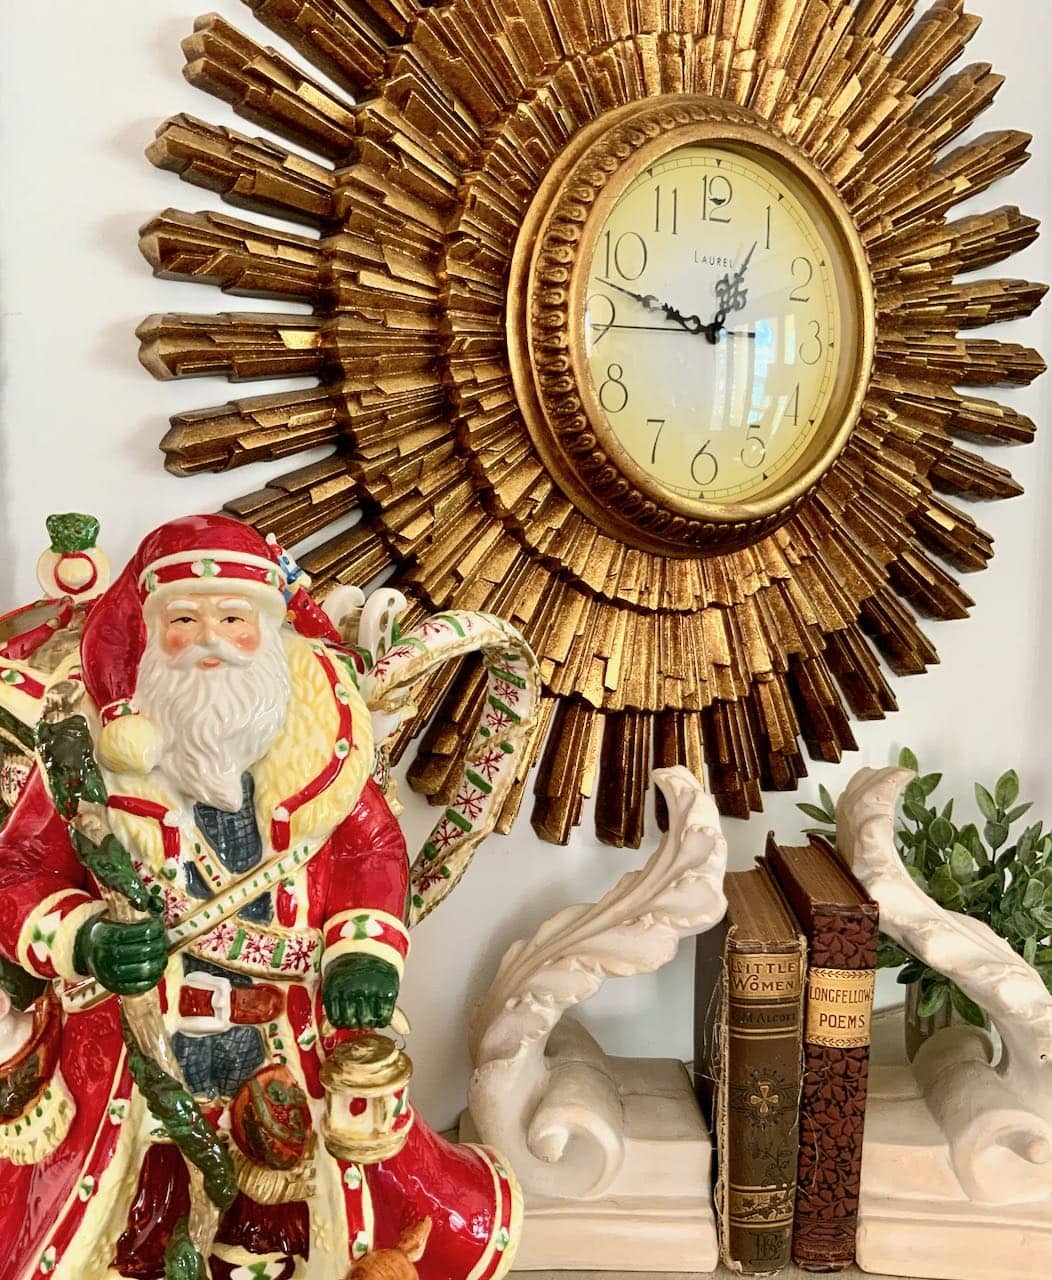 Large ceramic Santa Claus pitcher in front of a large sunburst clock and two stone bookends with two vintage books